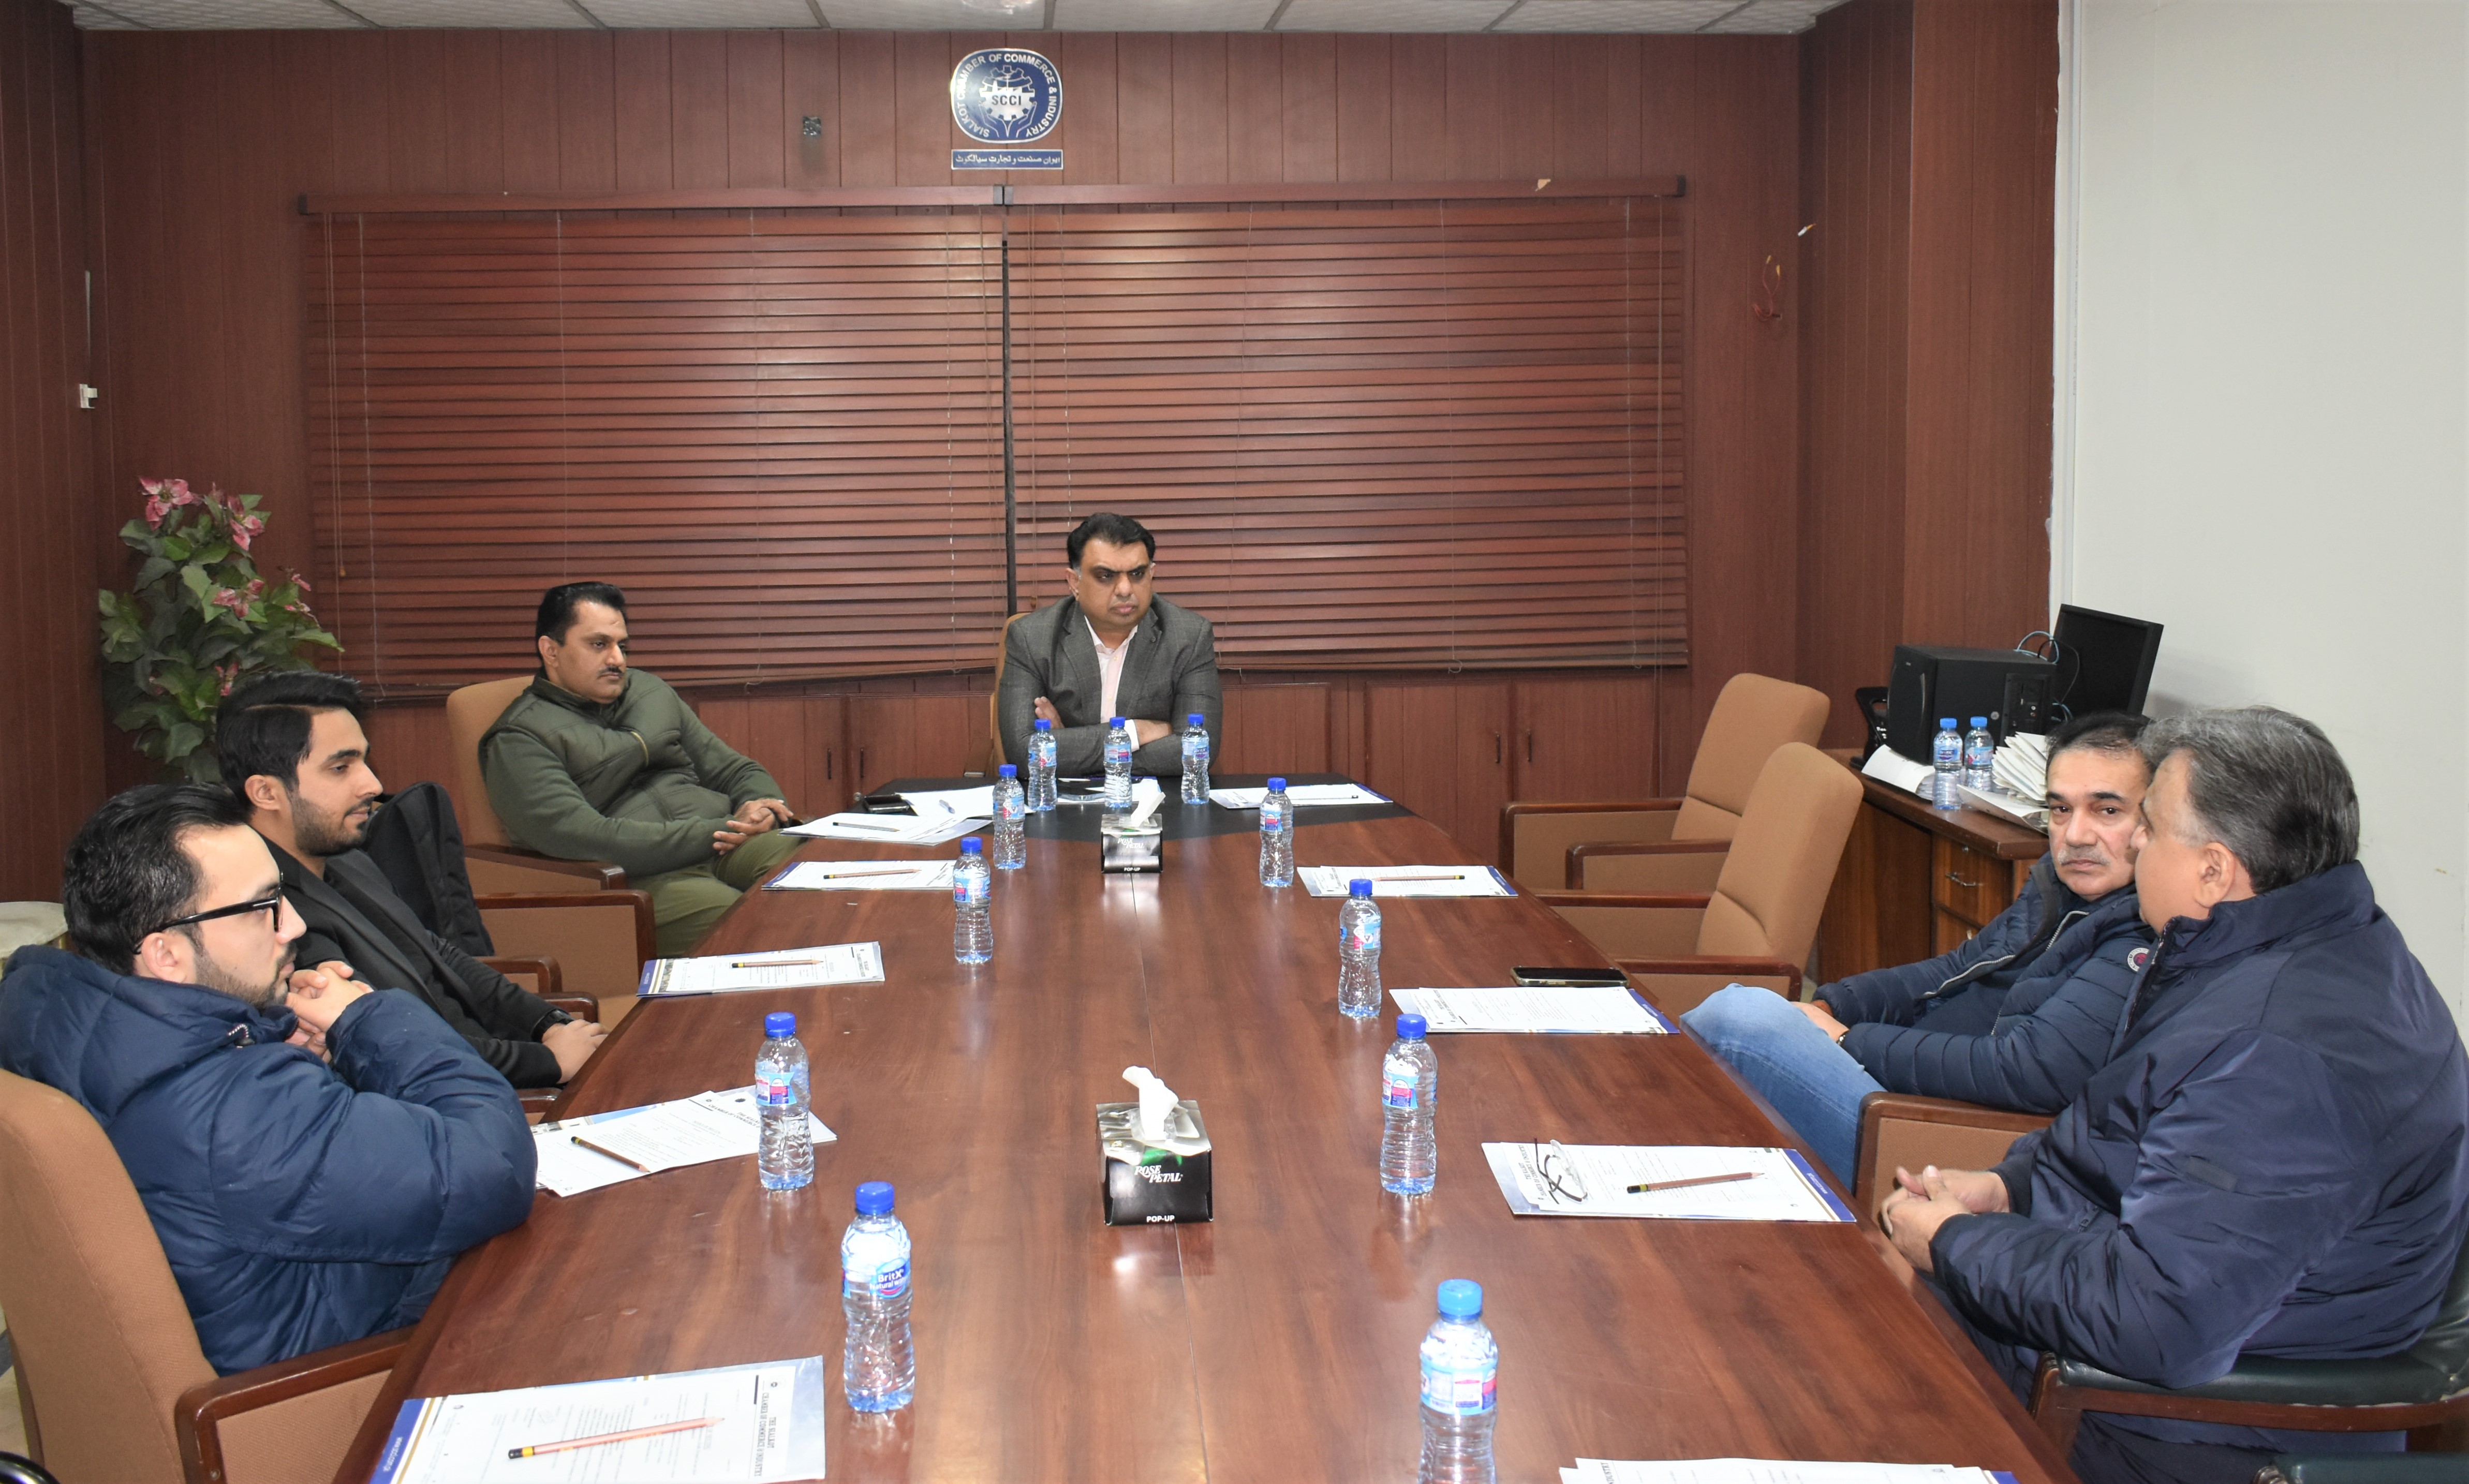 Mr. Zeeshan Tariq, Chairman chaired a meeting of Departmental Committee on Surgical Instruments/Health/Personal Care and Allied Industries on December 21, 2021 at SCCI. The objective is to discuss the feedback about the visit of a delegation to the University of Sialkot (USKT) and University of Management Sciences & Technology Sialkot (UMT) for strengthening the Industry-Academia Linkages; and proposed projects have been discussed in the meeting which would be assigned to the Universities.  Furthermore, the members of the Committee shared their views & working on the implementation & prospects of Medical Devices Regulations (MDR) in order to take some crucial steps for spreading awareness to the industry.